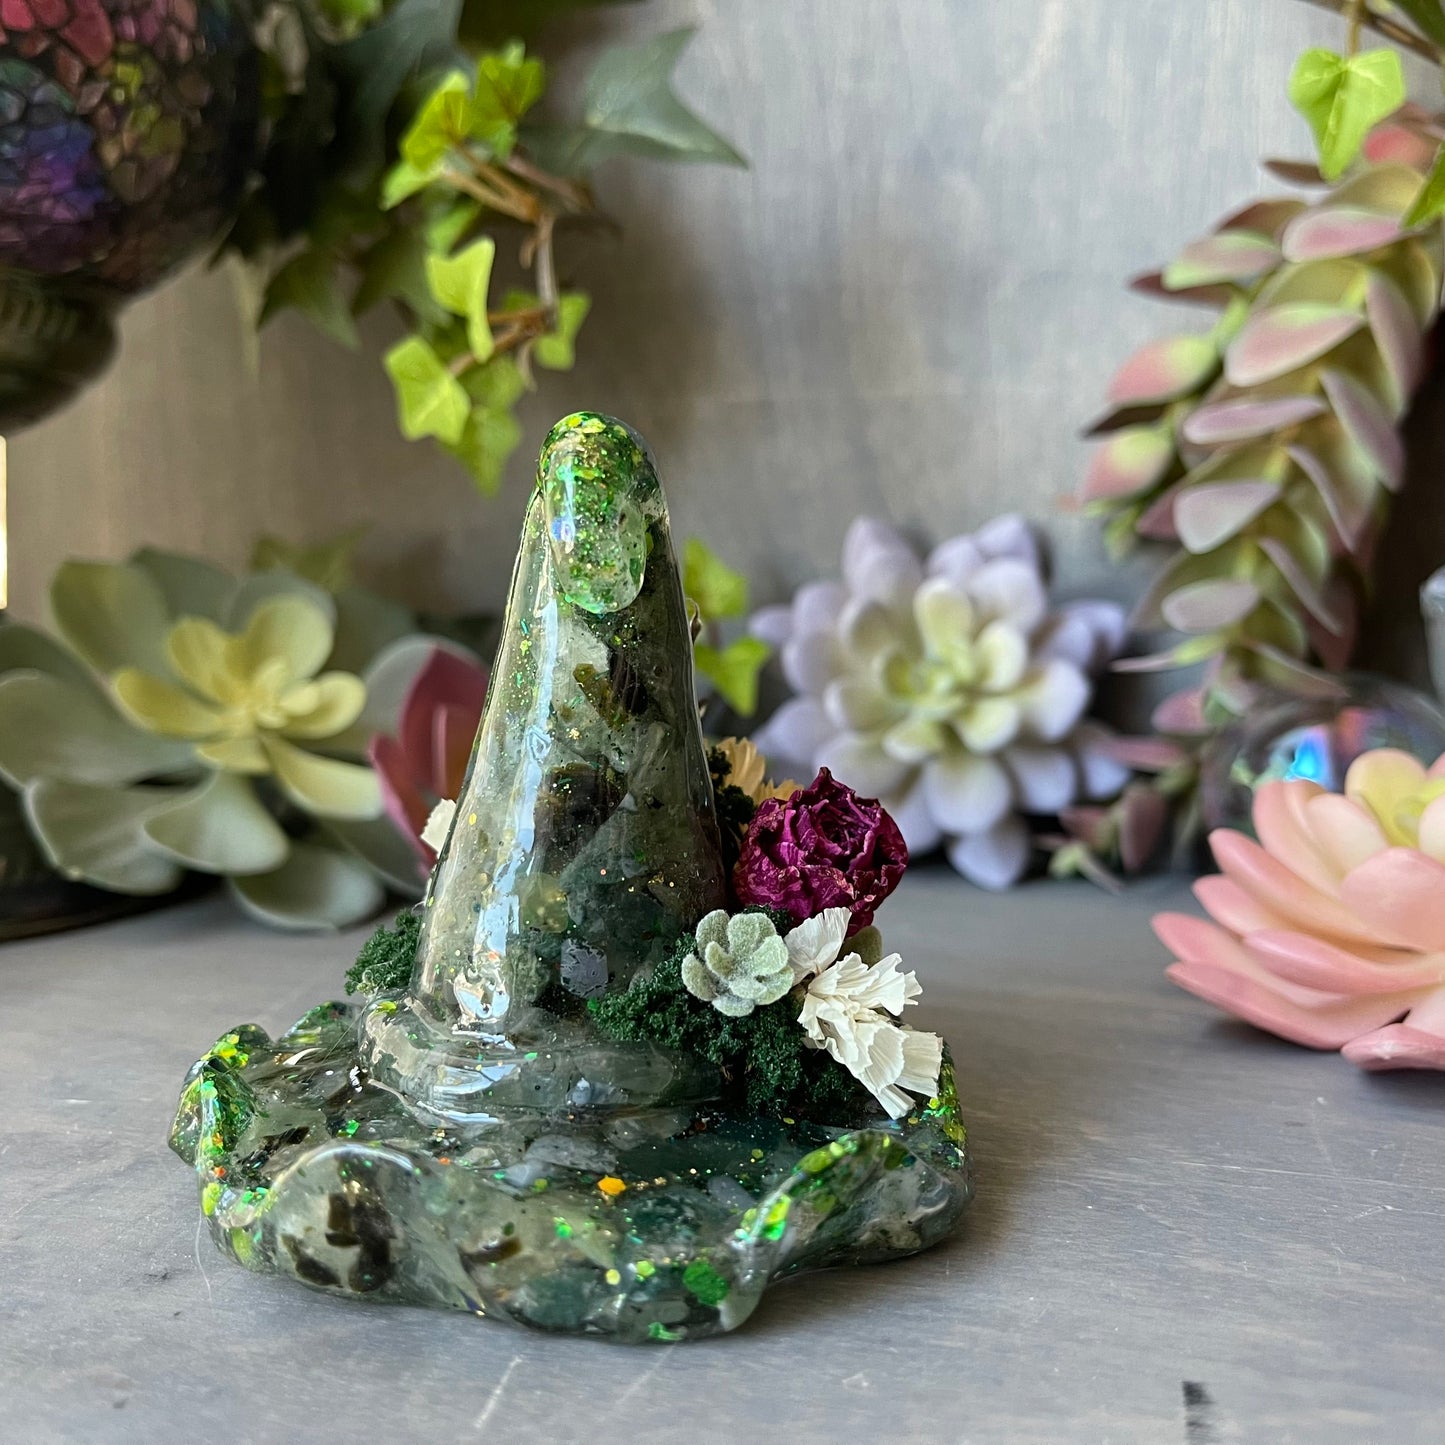 Whimsical Hat - agate/prehnite - each sold separately